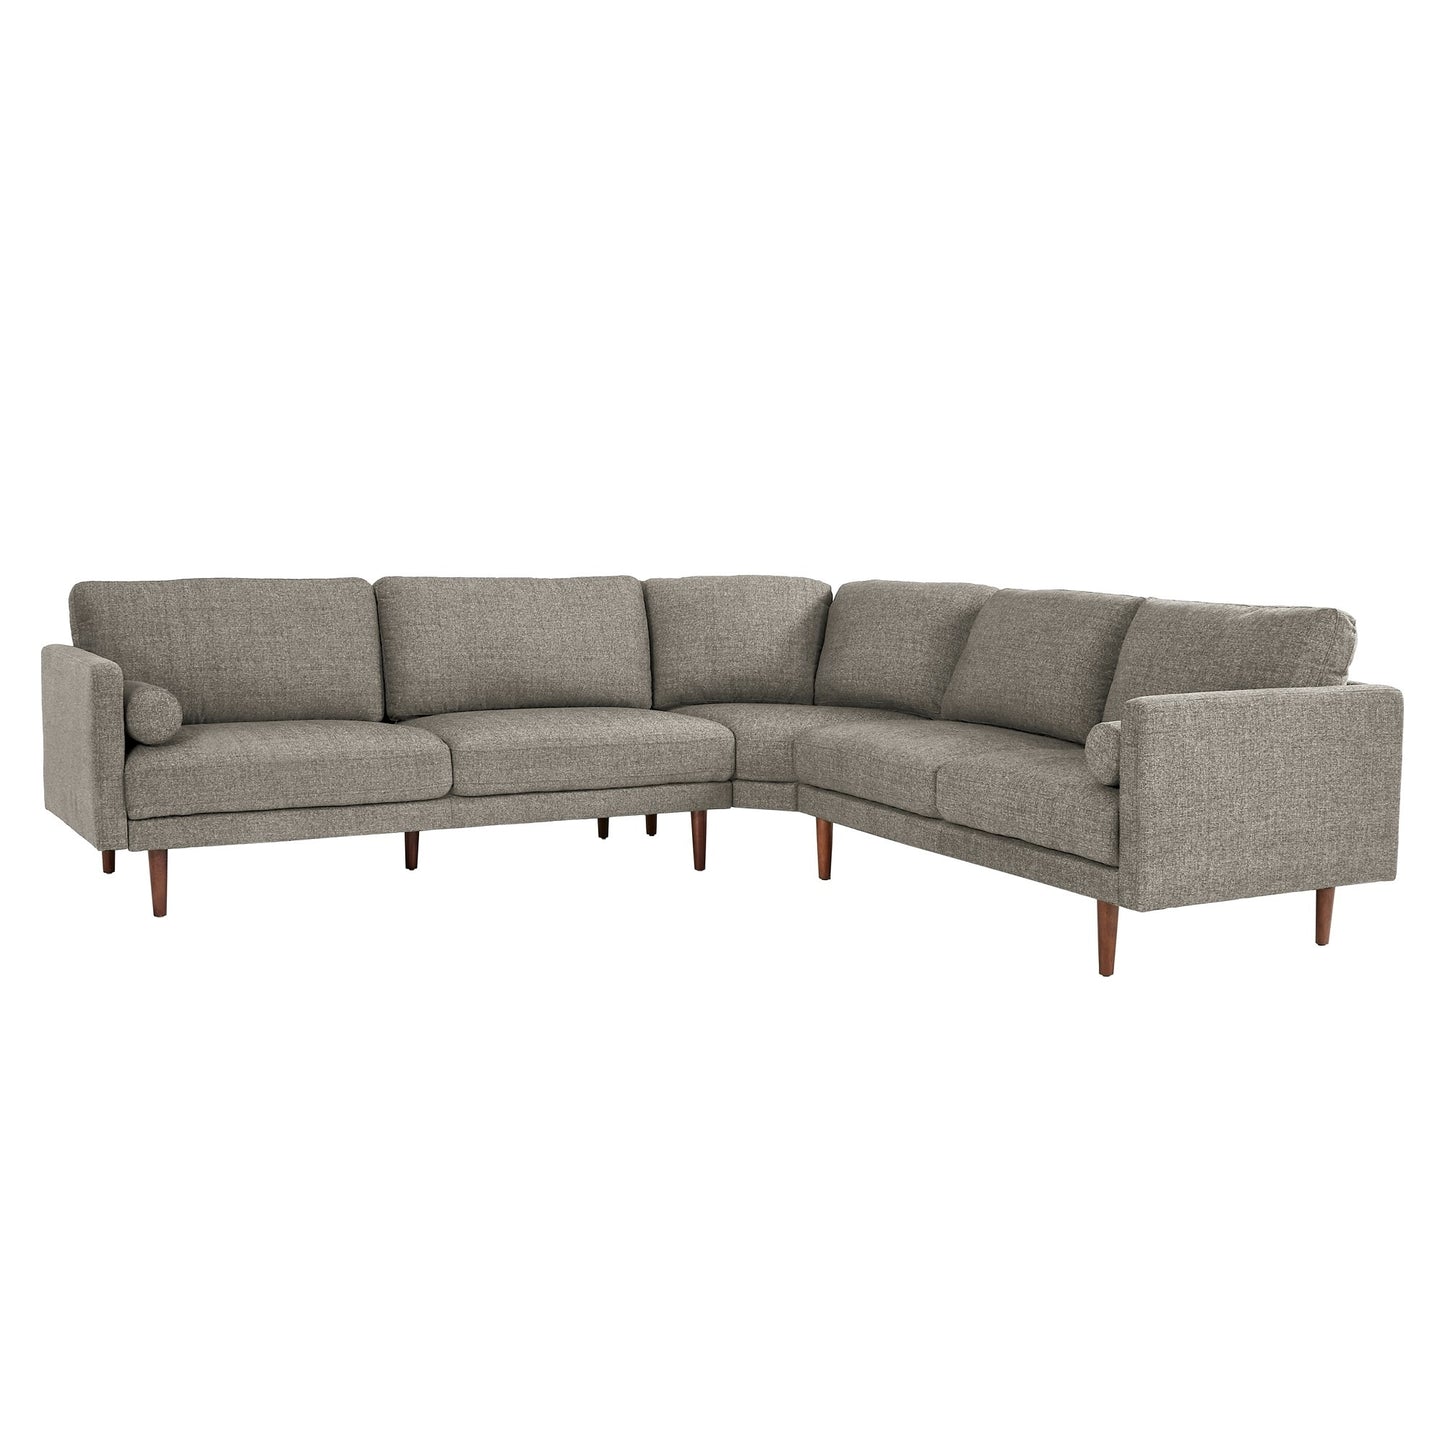 Mid-Century Upholstered Sectional Sofa - Light Grey, 6-Seat, L-Shape Sectional